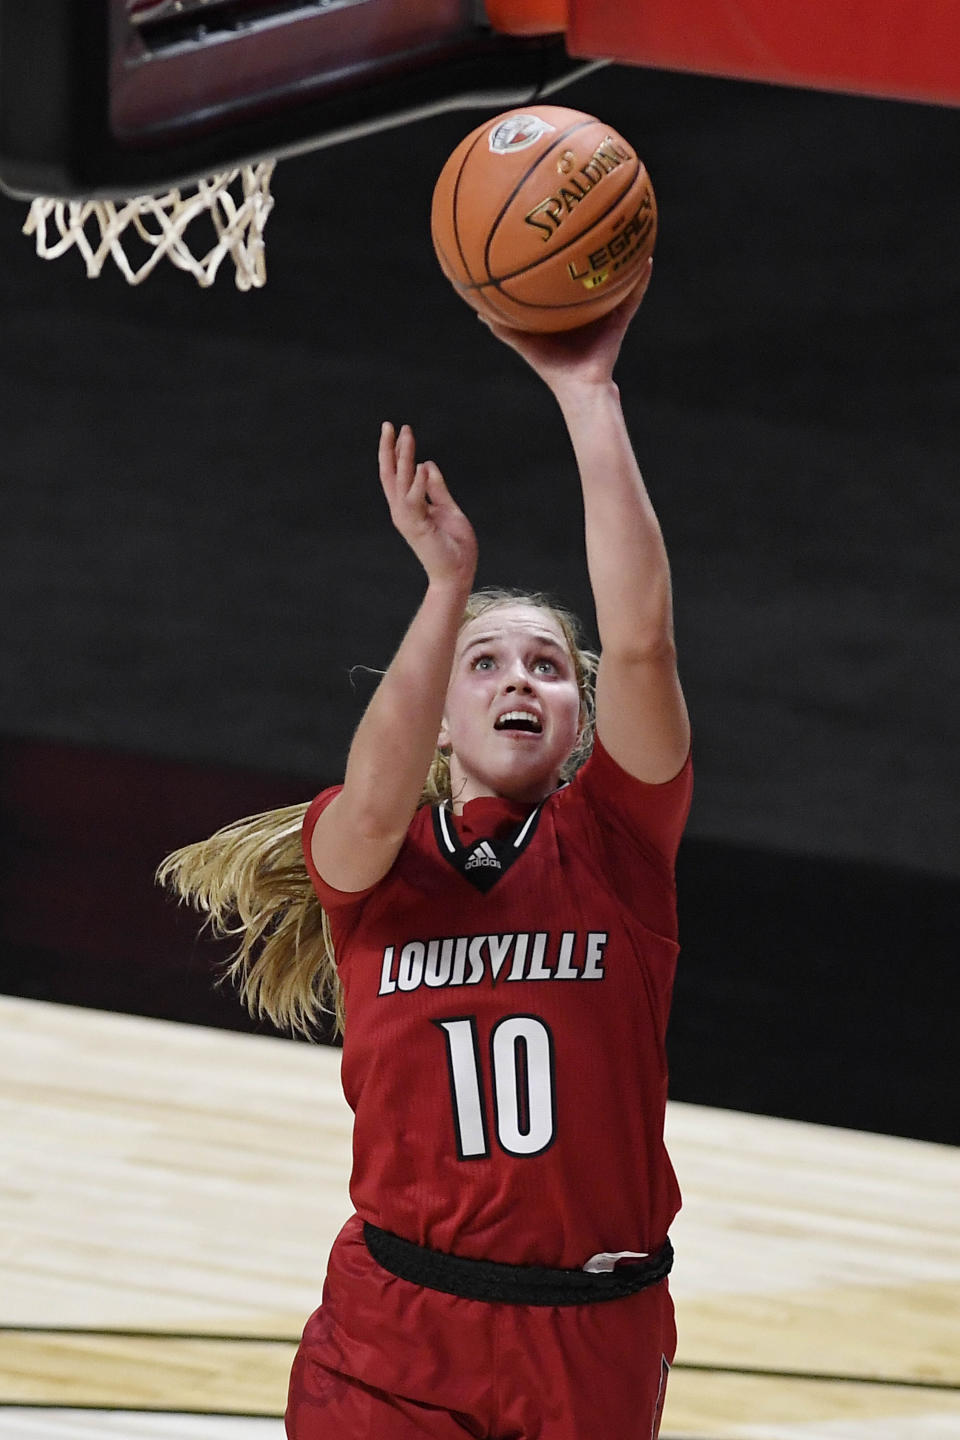 Louisville's Hailey Van Lith shoots during the first half of the team's NCAA college basketball game against Louisville, Friday, Dec. 4, 2020, in Uncasville, Conn. (AP Photo/Jessica Hill)